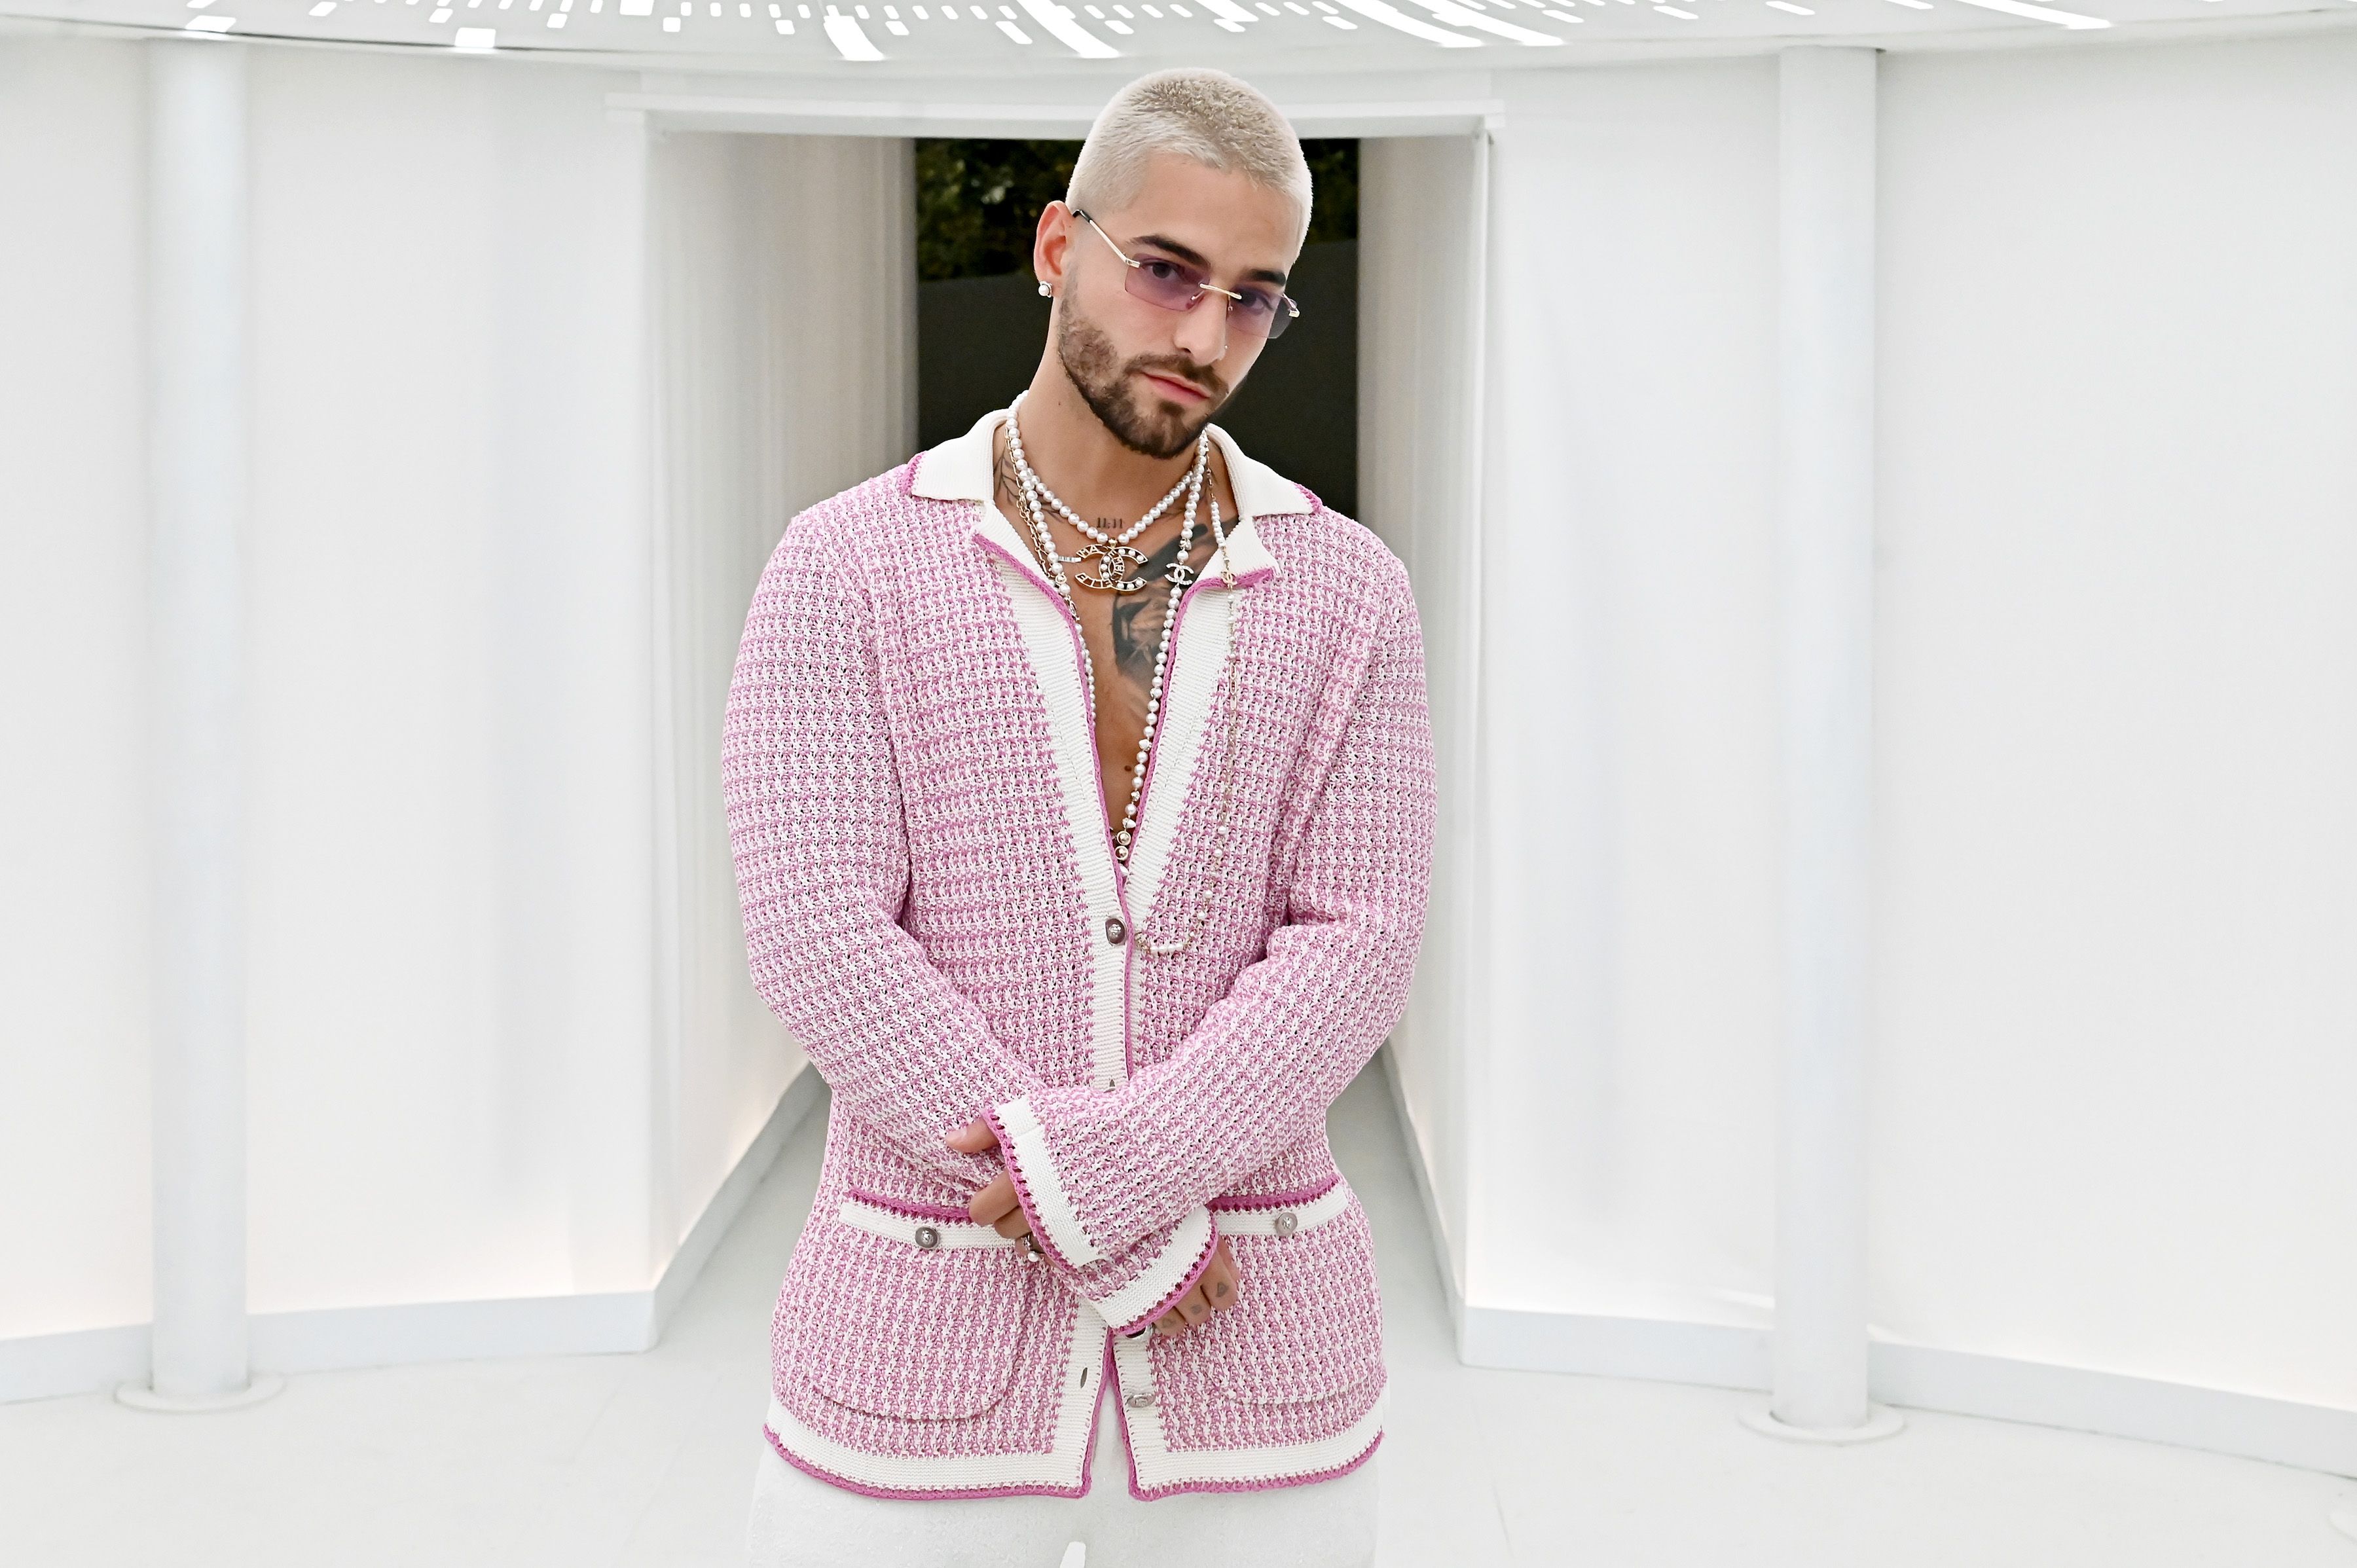 Marry Me' and 'Encanto' star Maluma on his favorite women